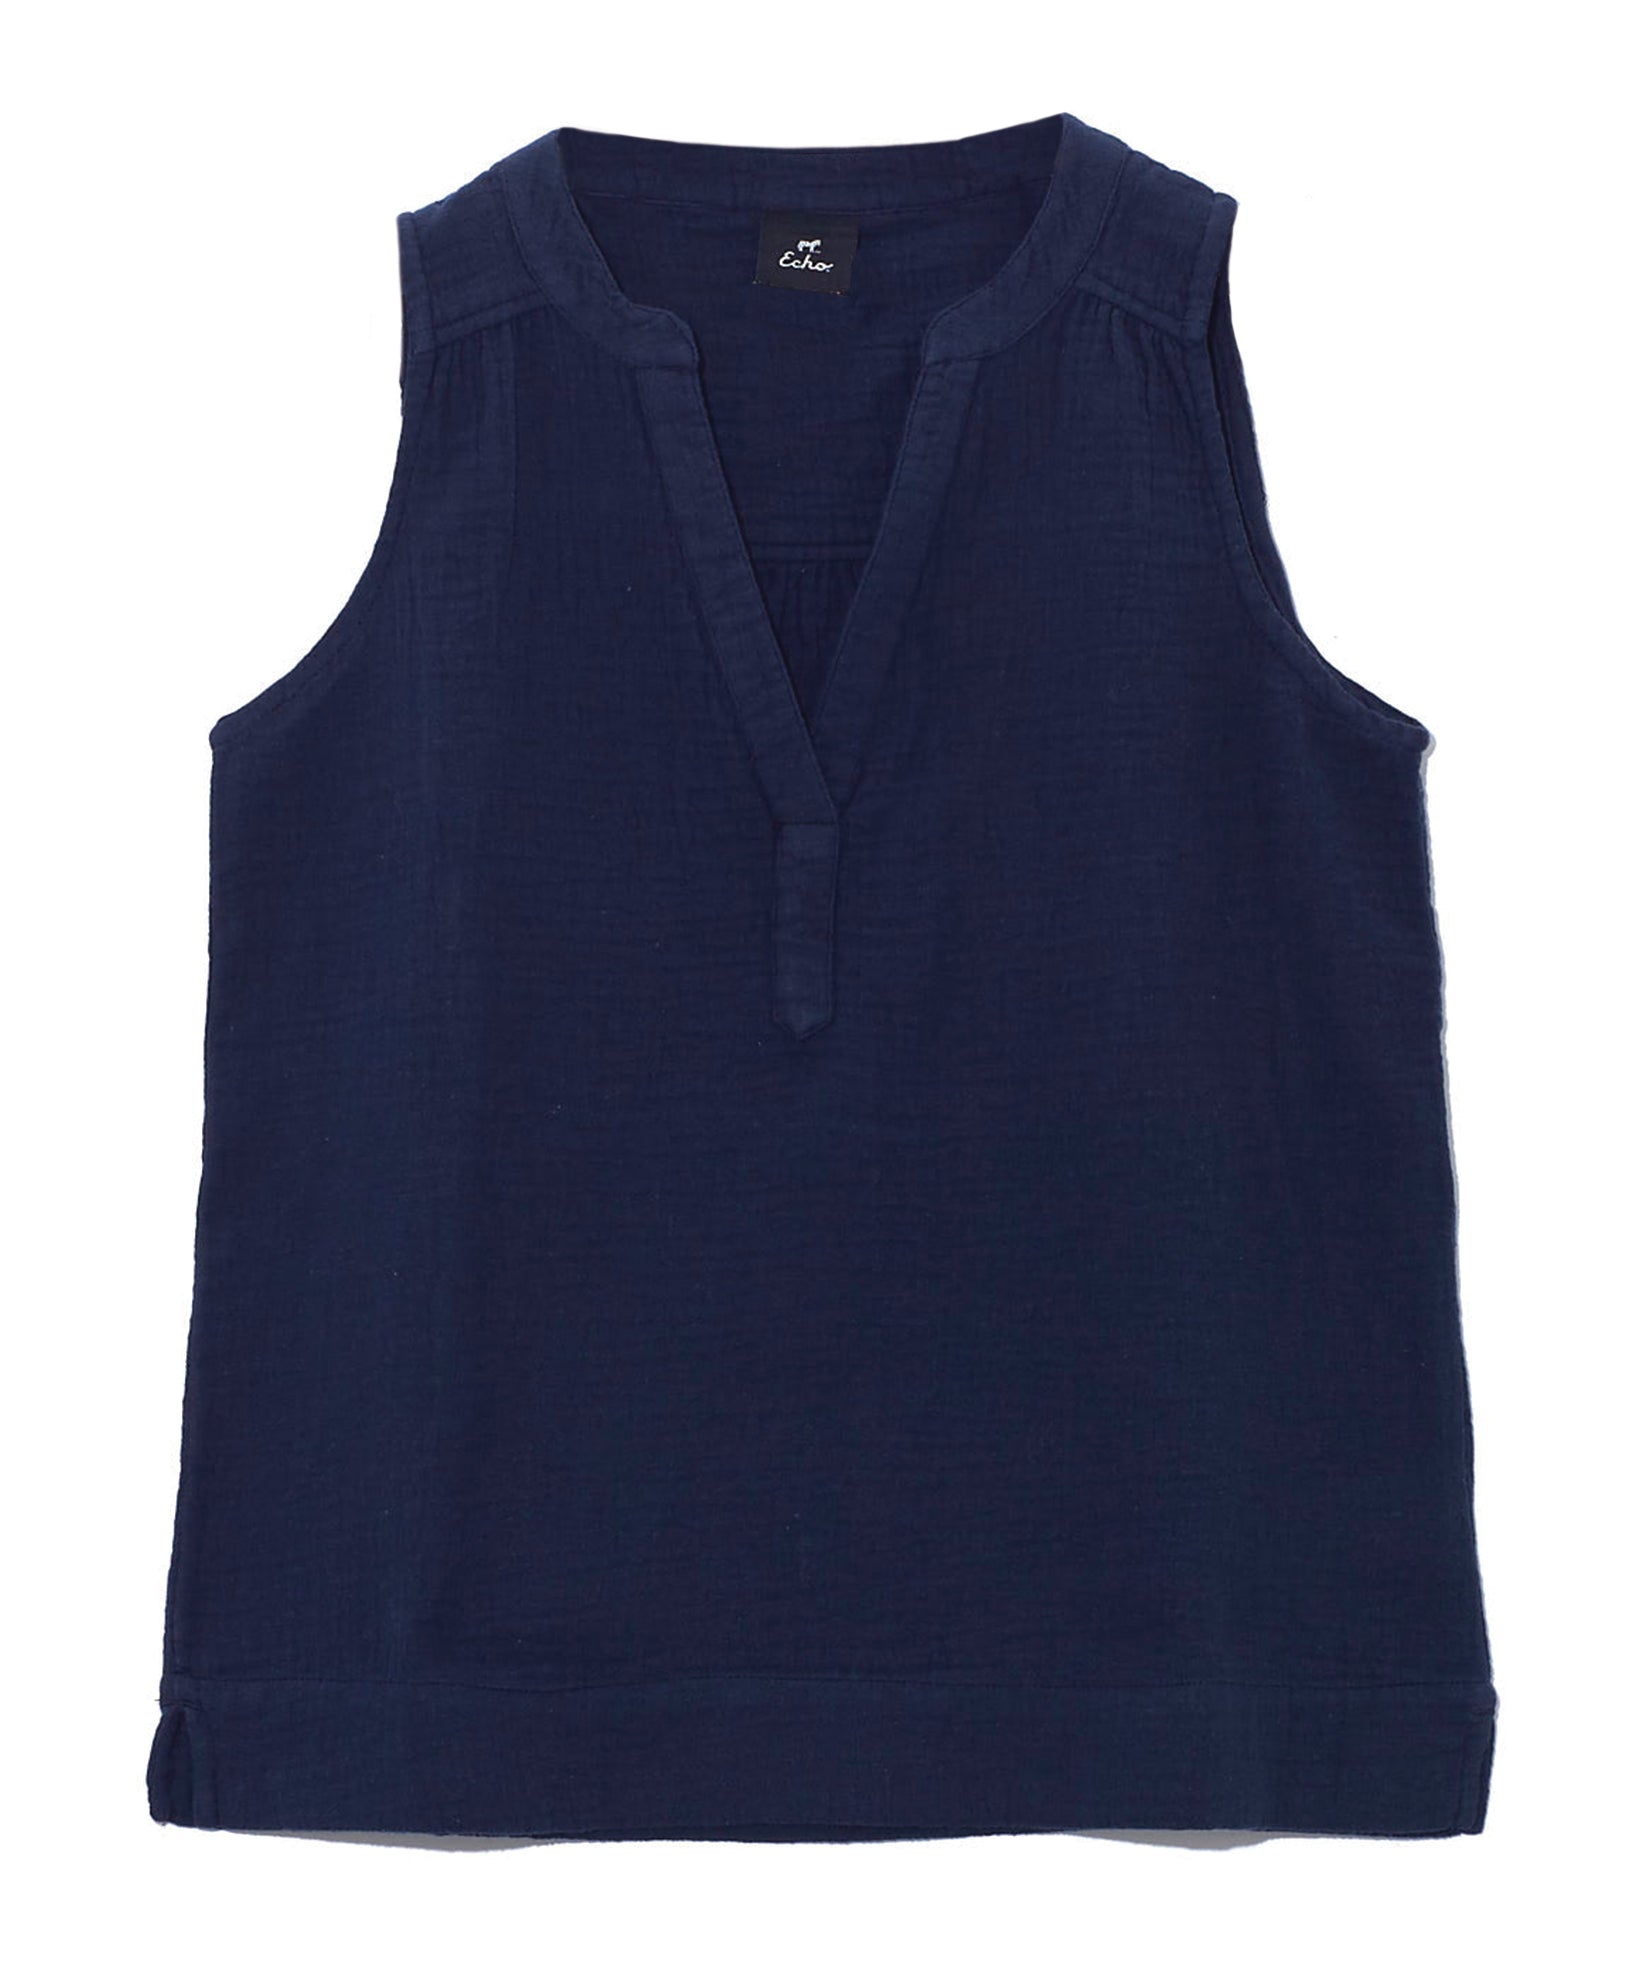 Double Gauze Sleeveless Top in color Navy